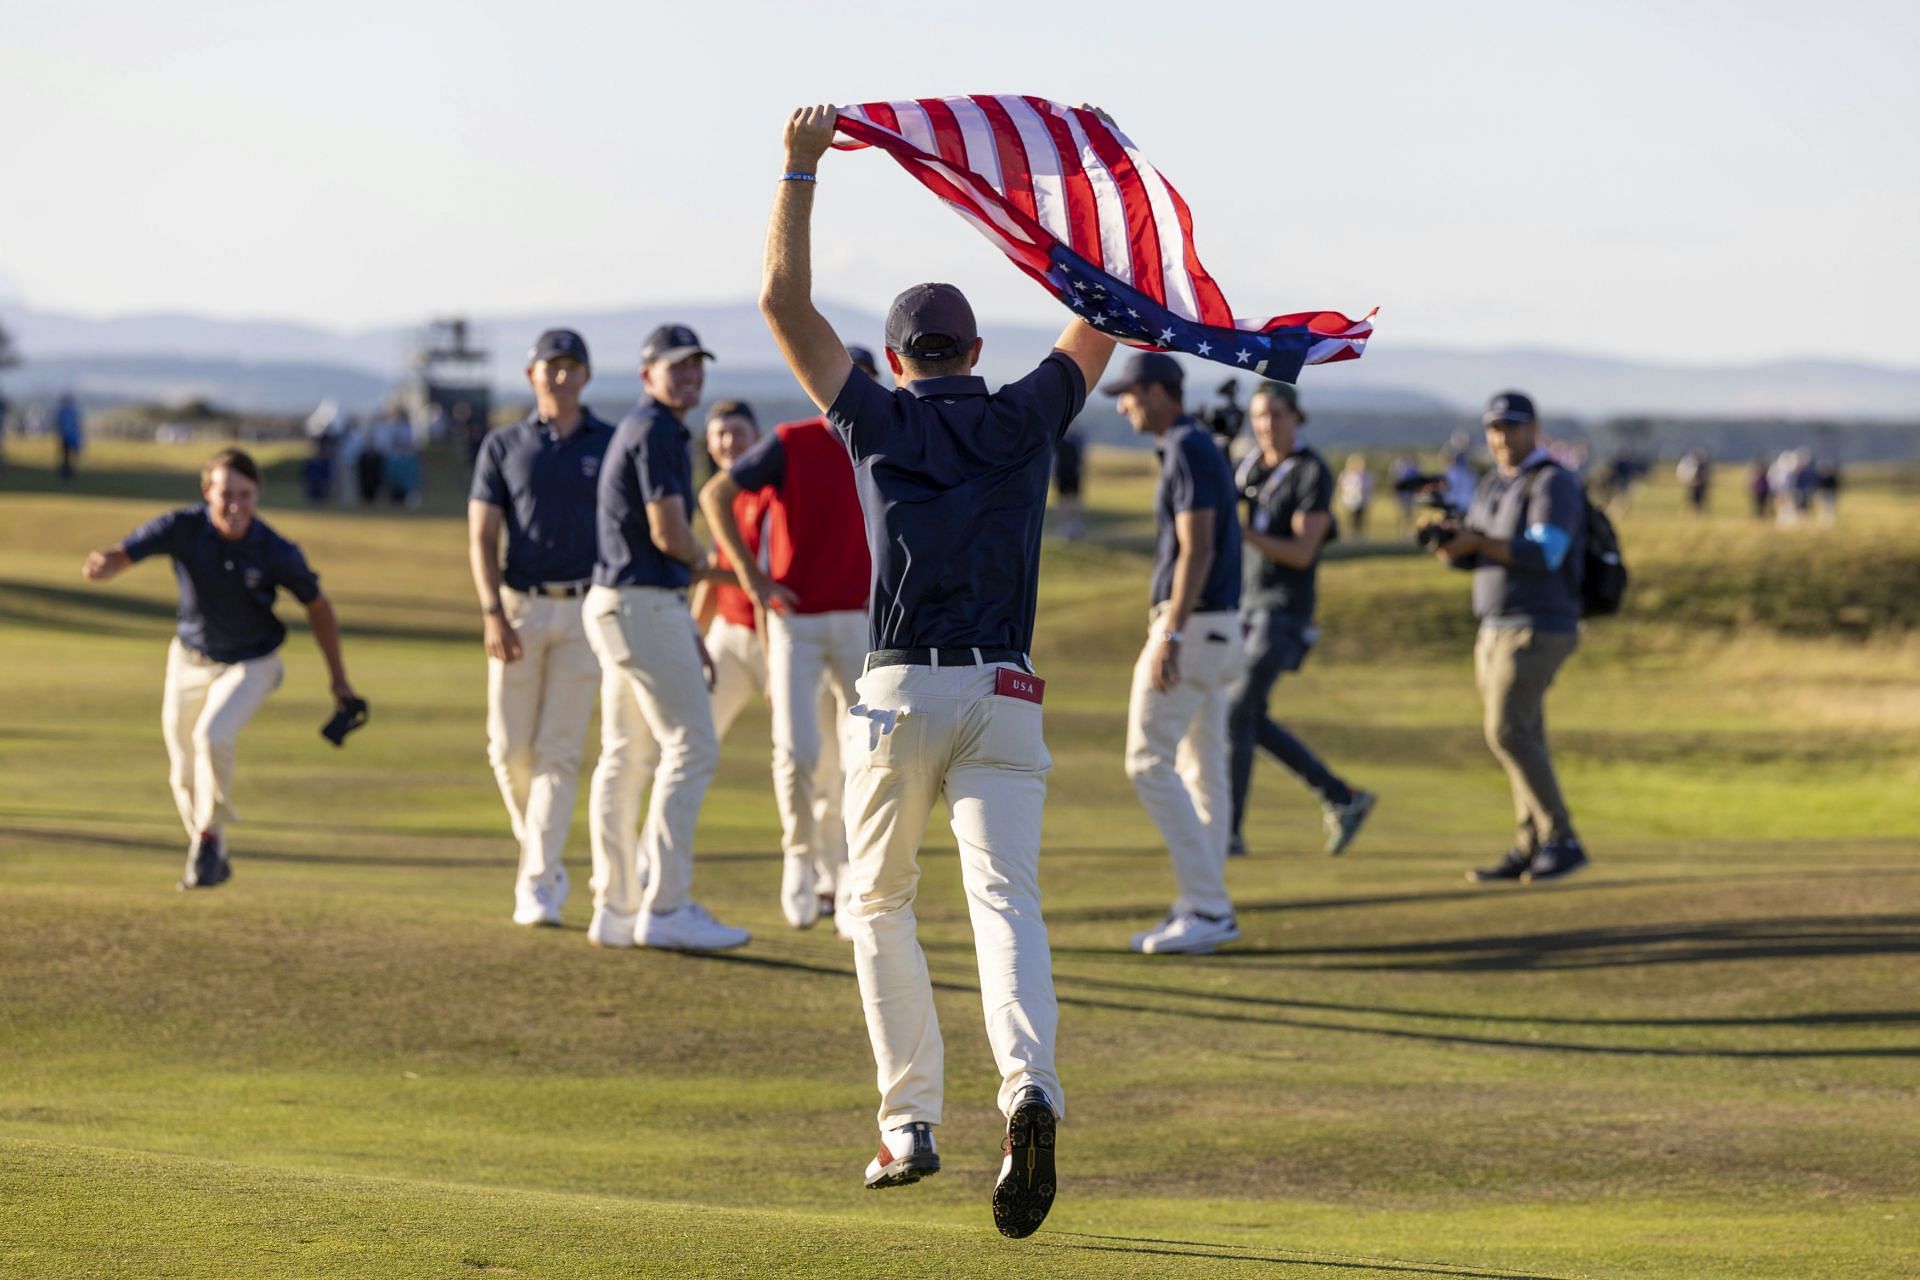 2023 Walker Cup Team USA bounces back after a slow start to beat Team GB&I